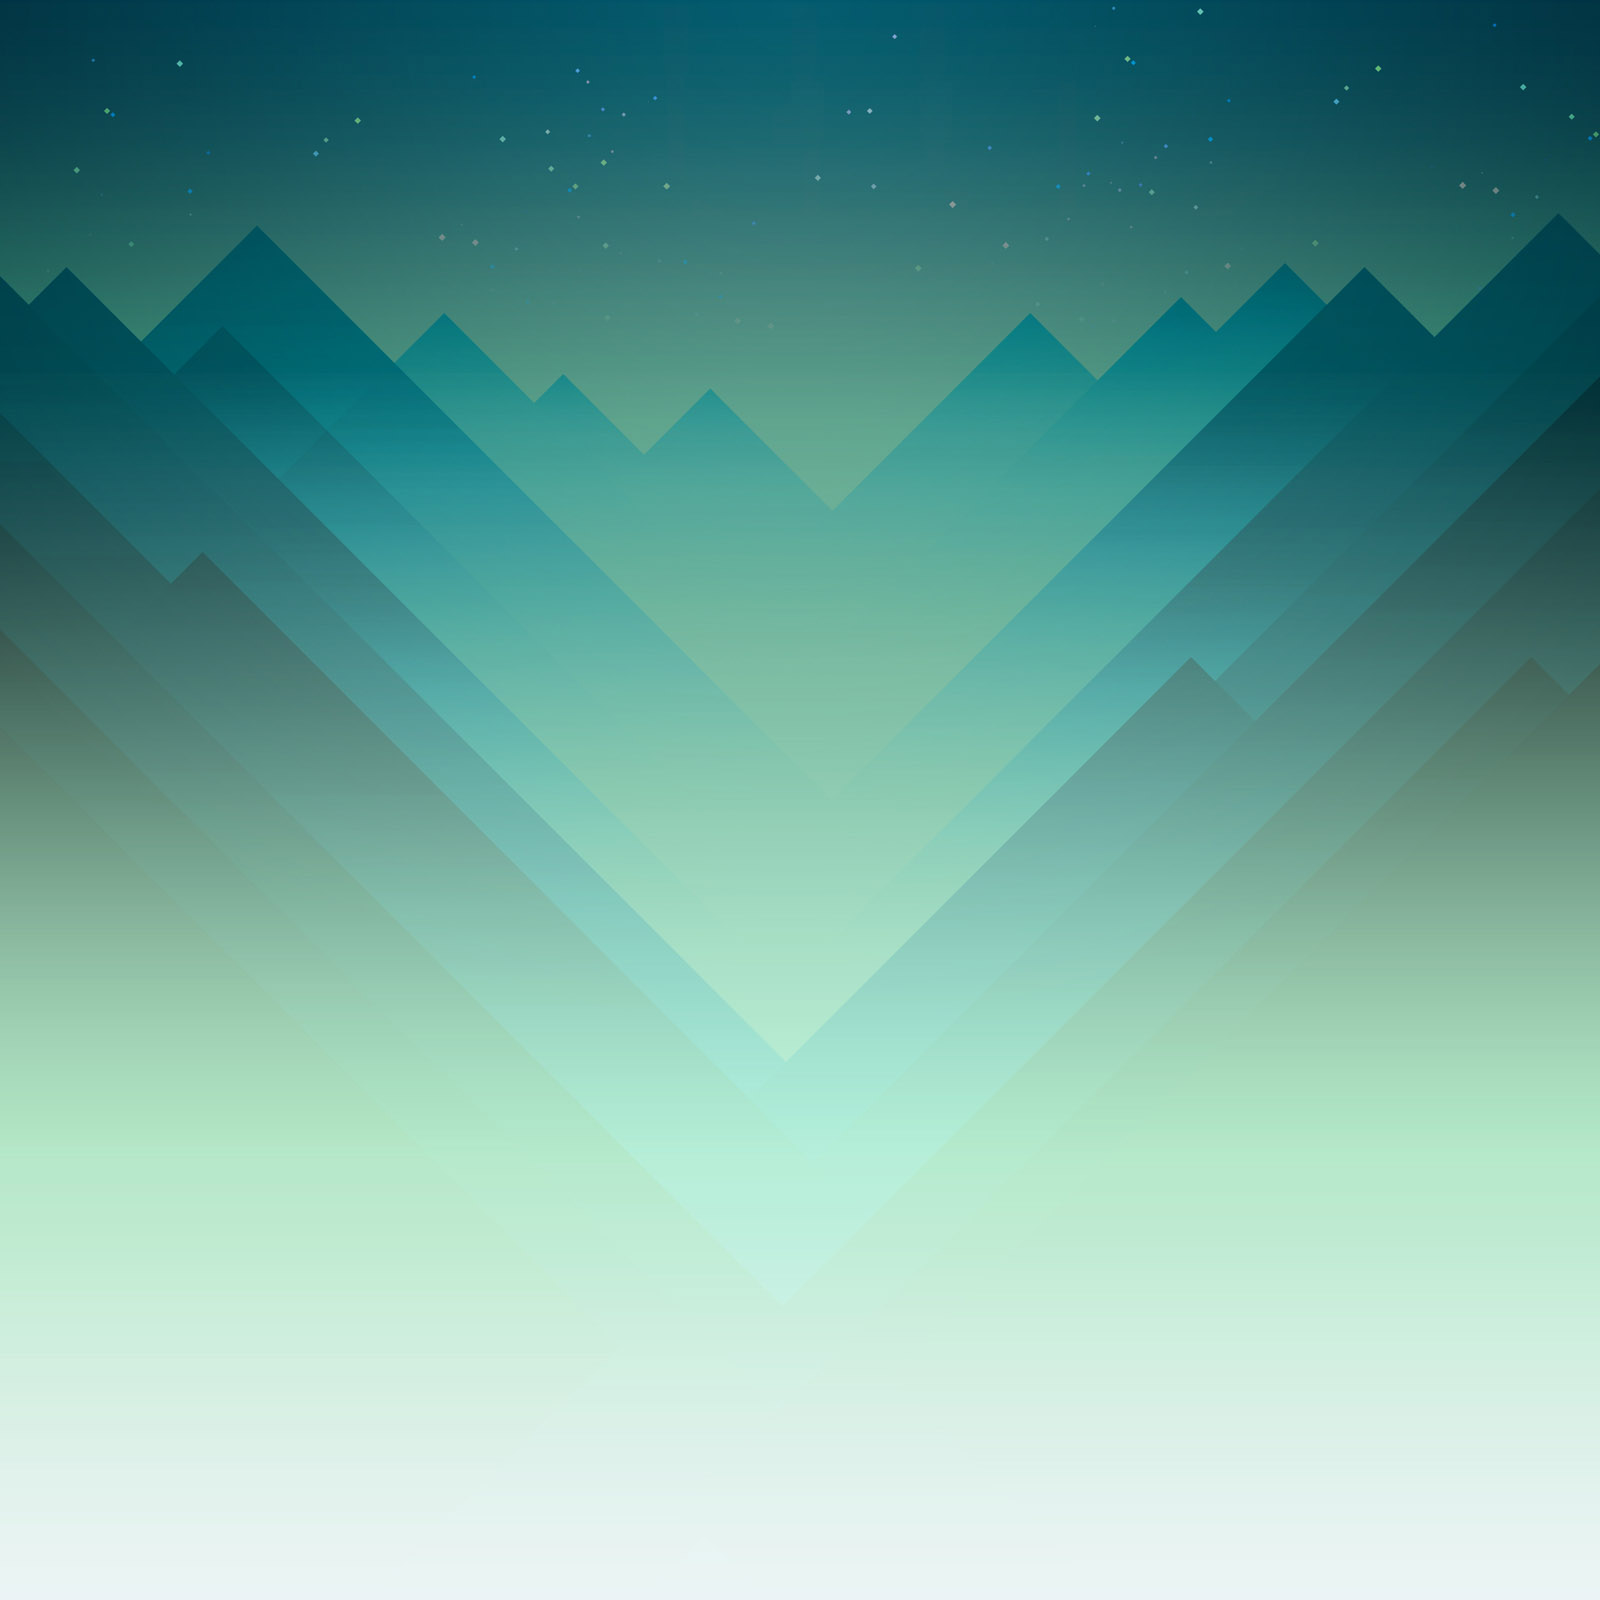 Monument Valley An Ios And Android Game By Ustwo